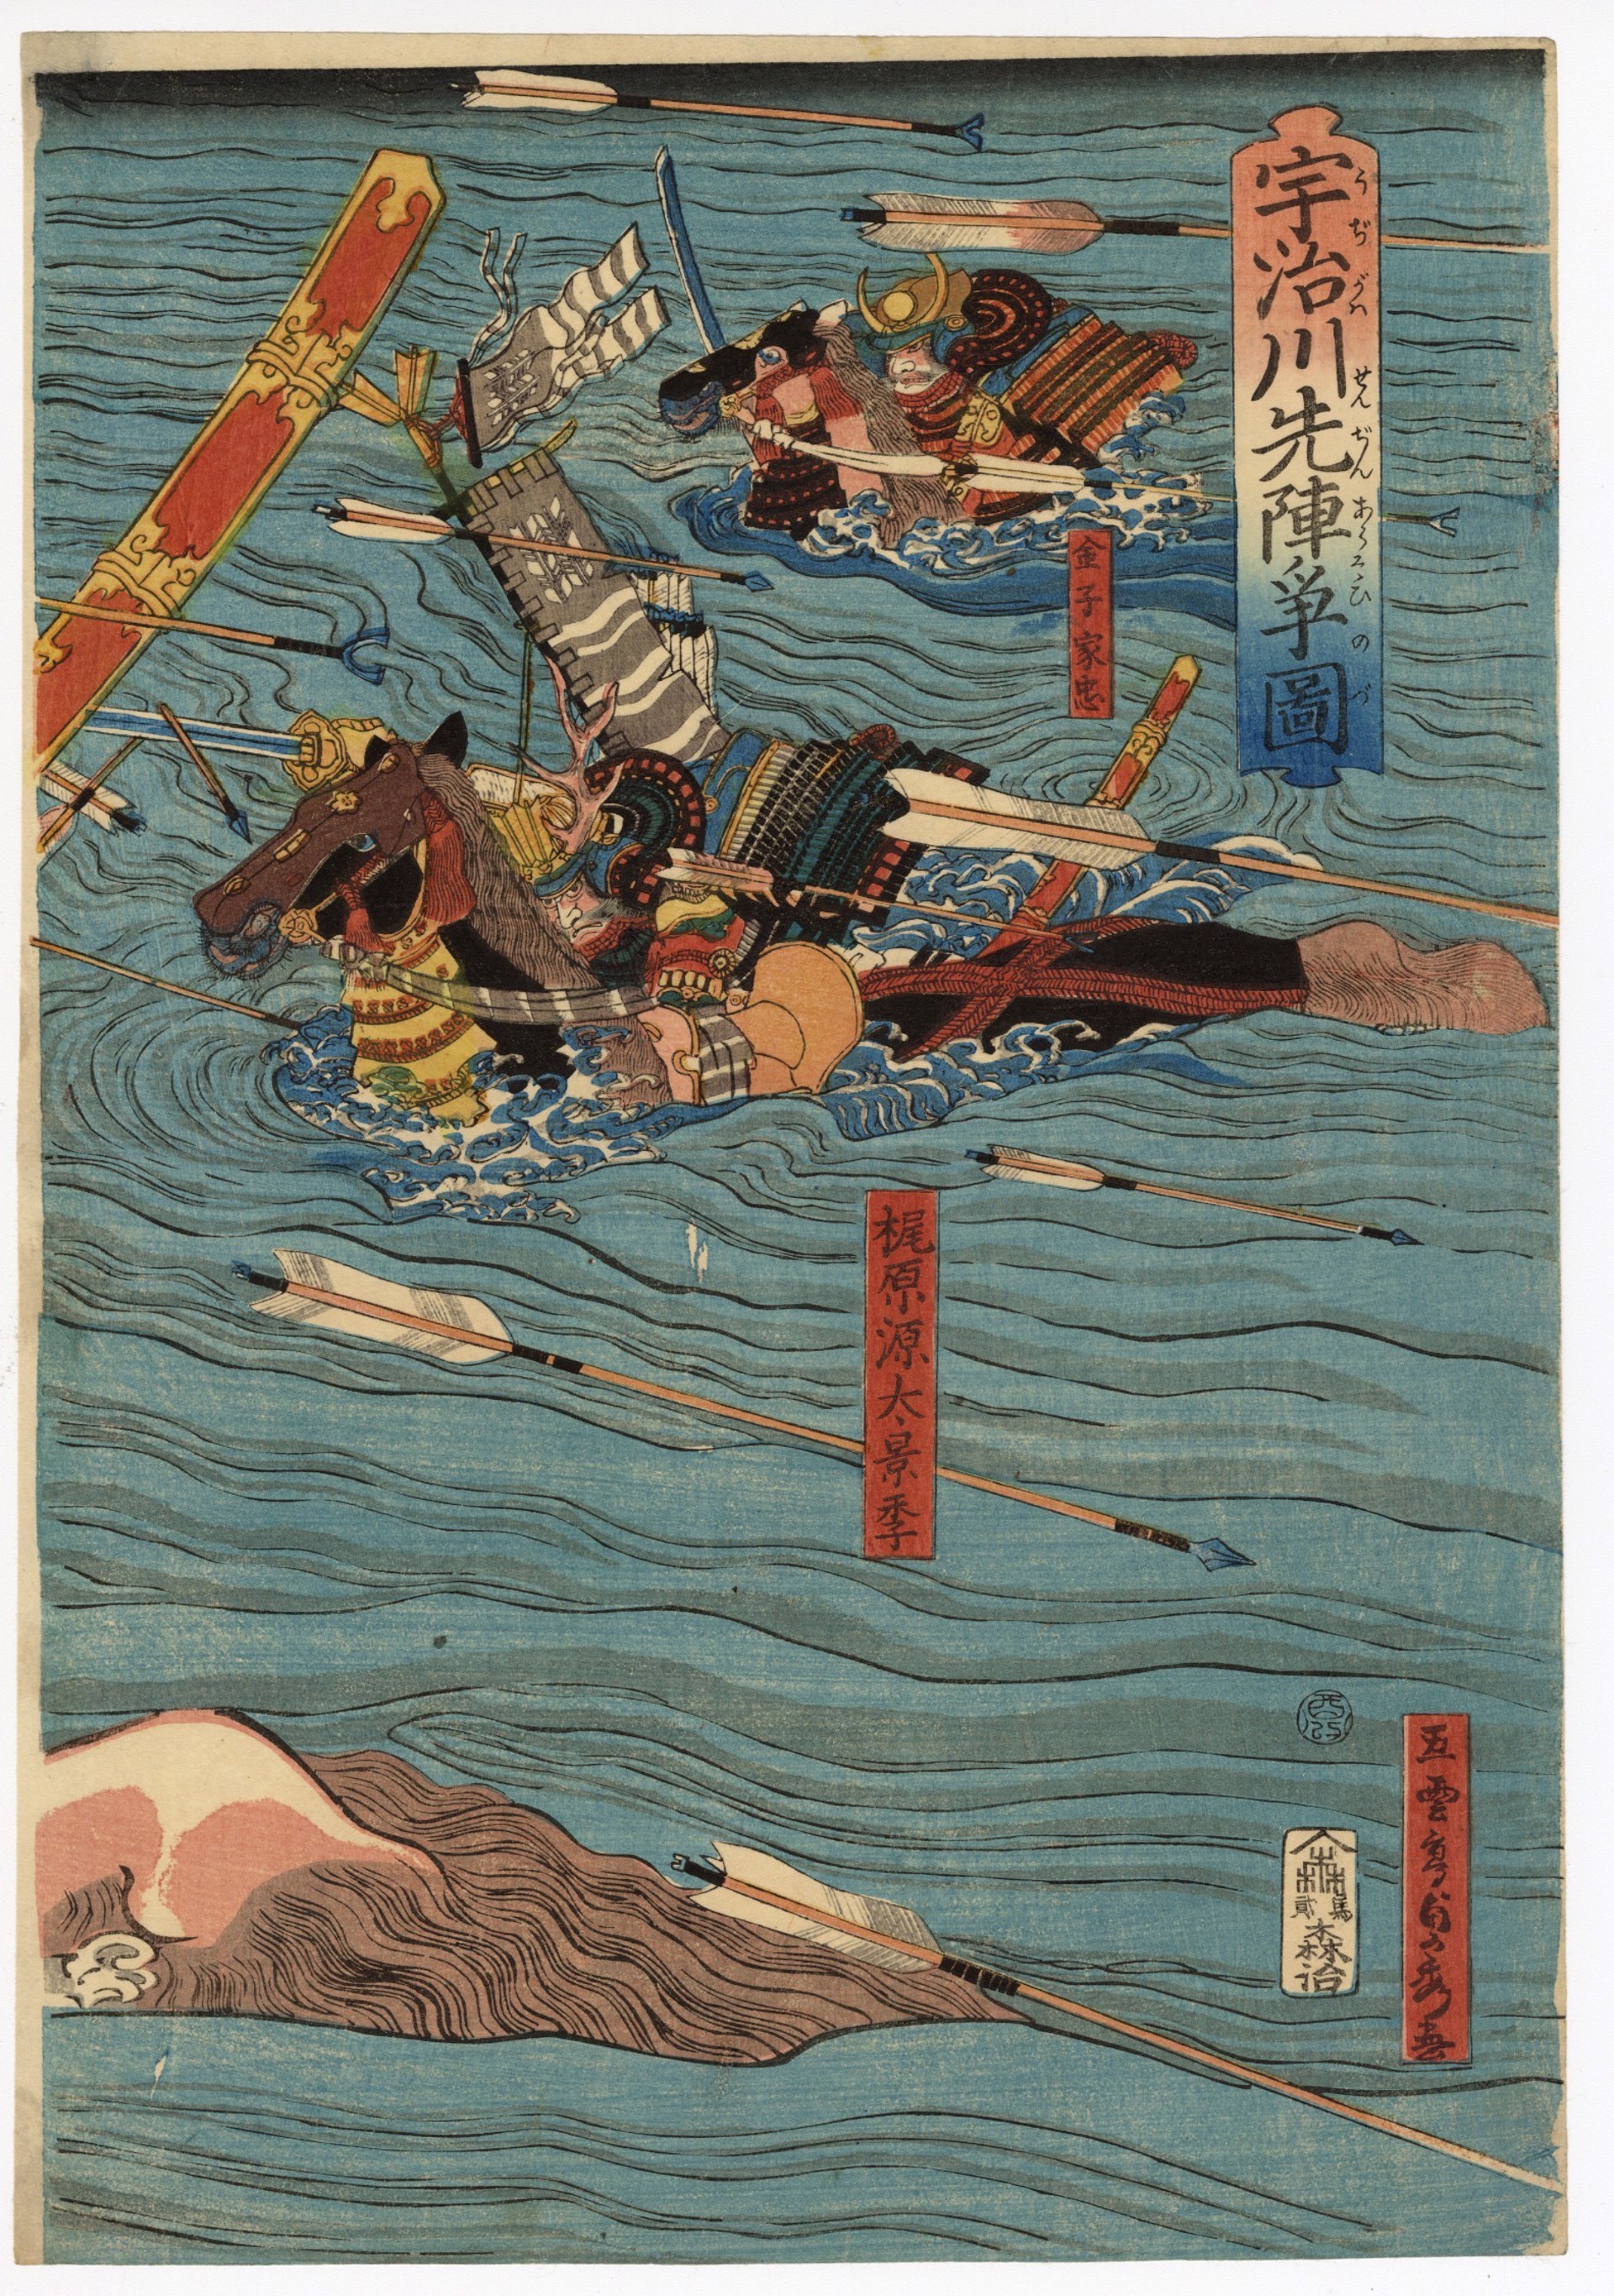 Competing to be the First at the Battle of Uji River by Sadahide